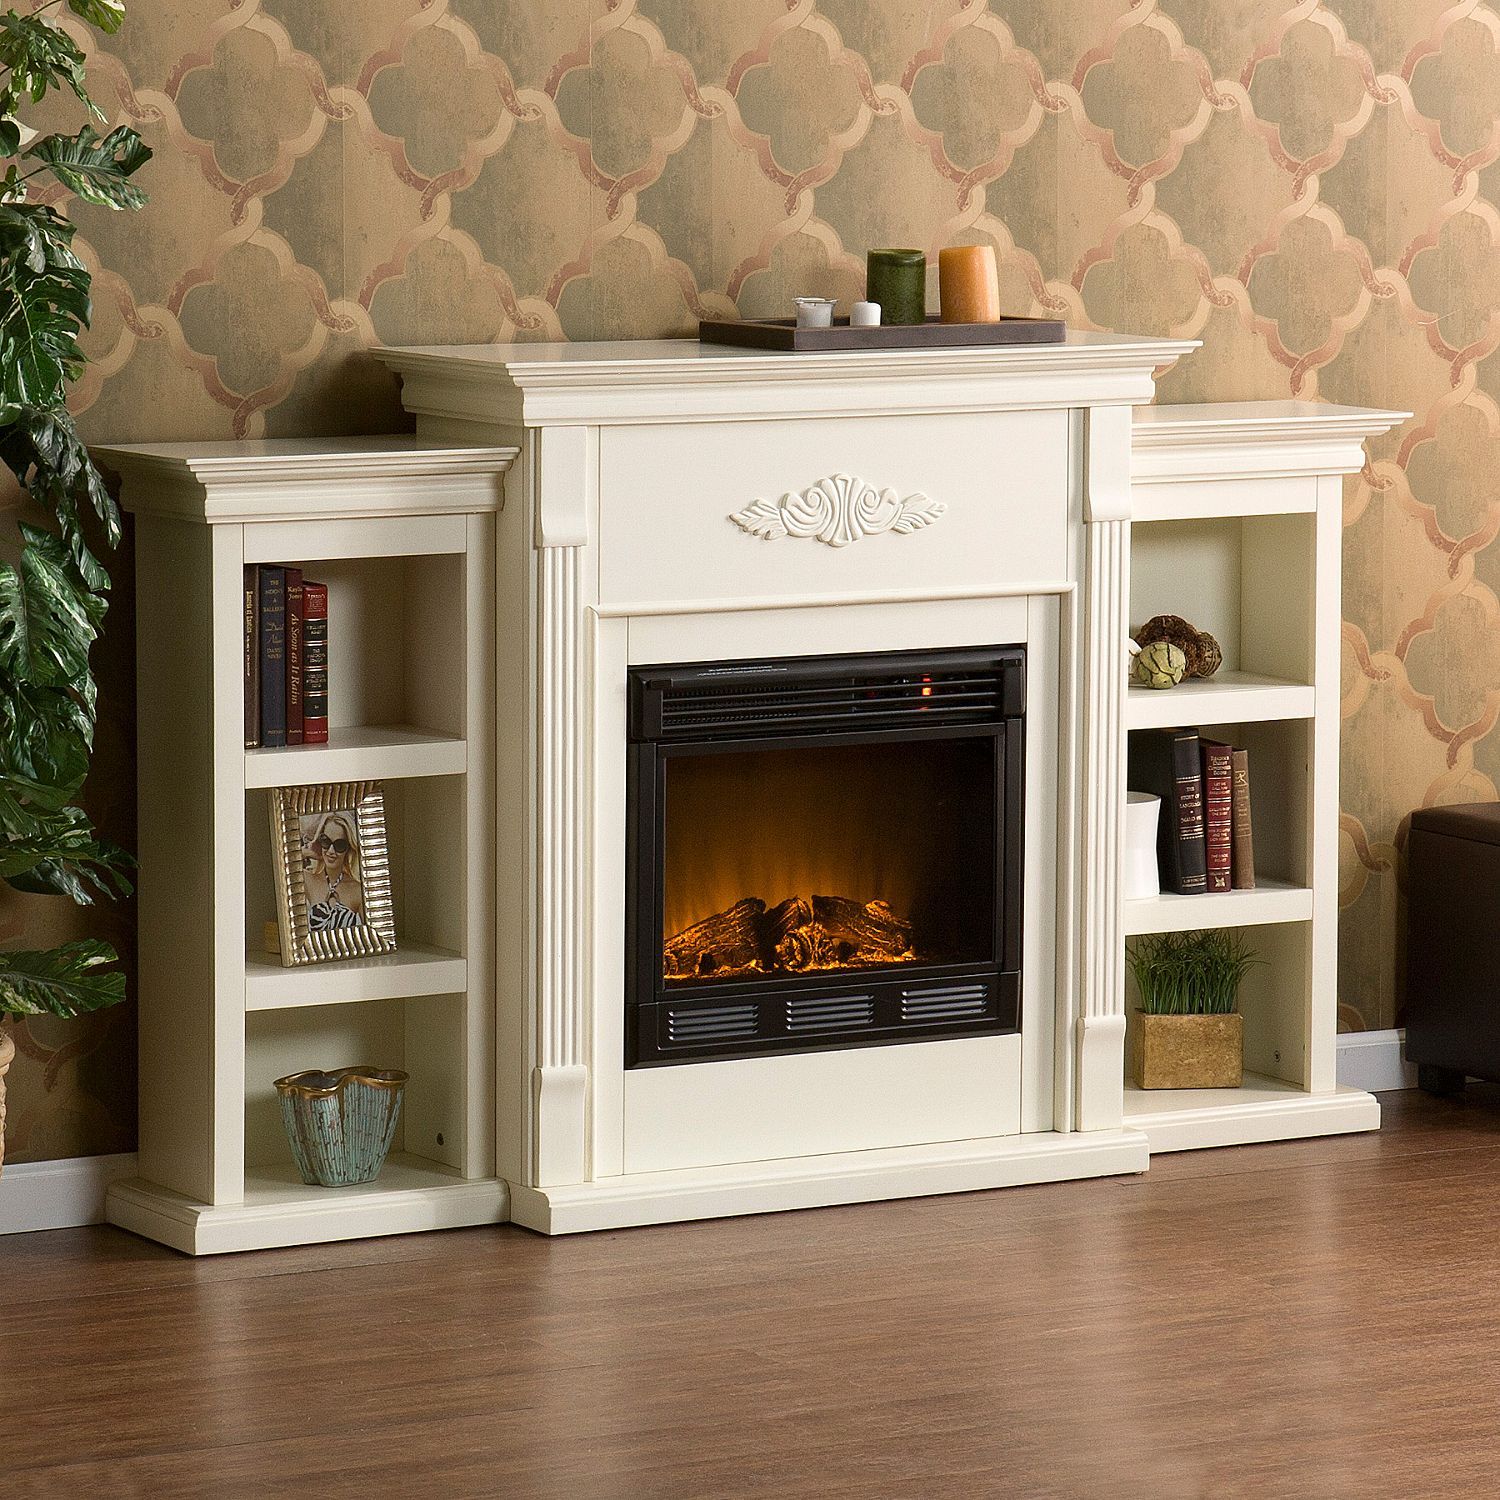 Indoor Gel Fireplace Best Of Emerson Electric Fireplace Ivory Sam S Club